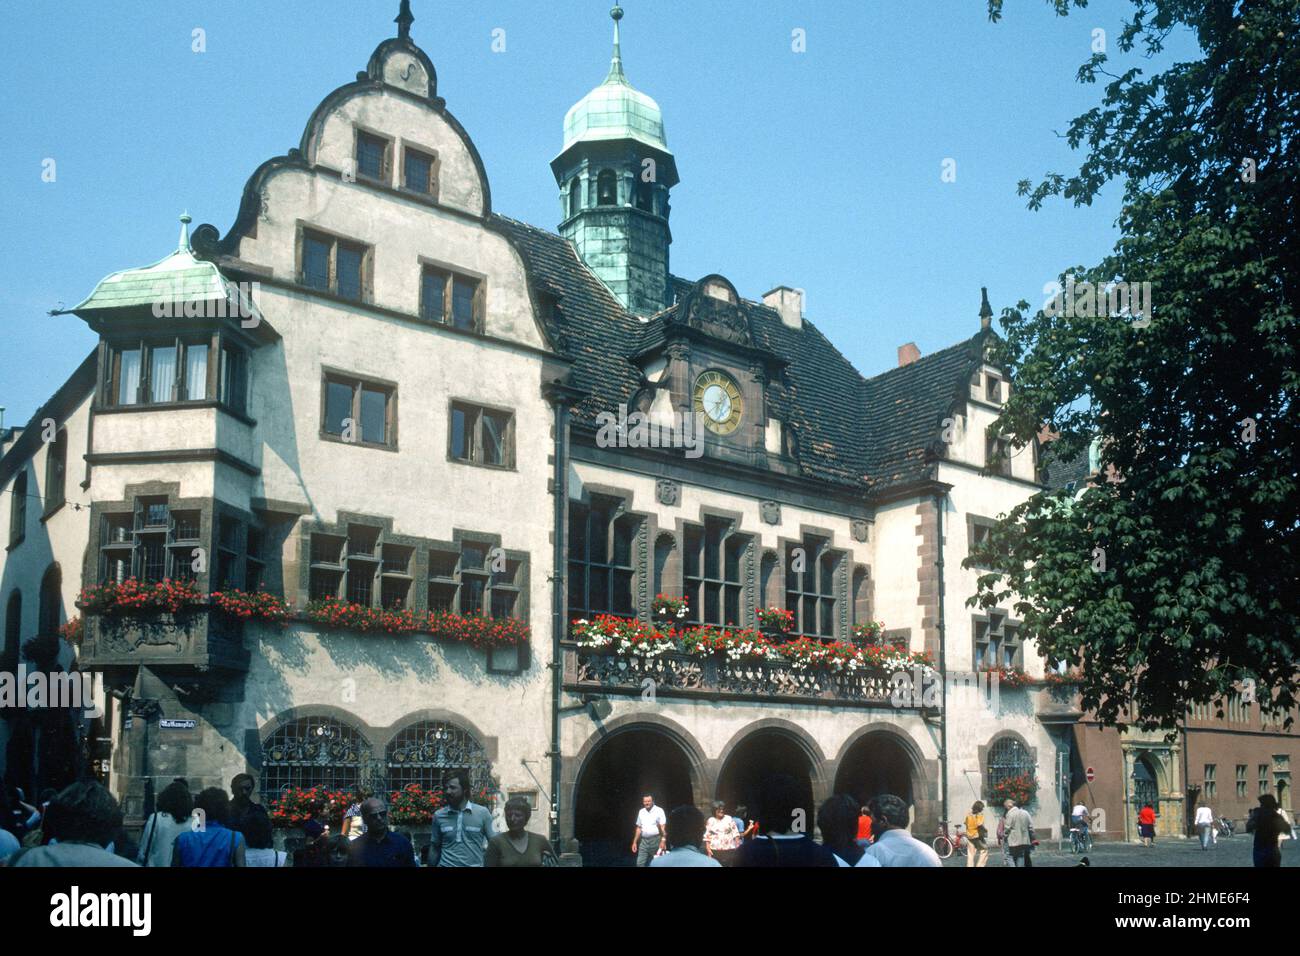 The Town Hall in 1981, Freiburg, Baden-Württemberg, Germany Stock Photo